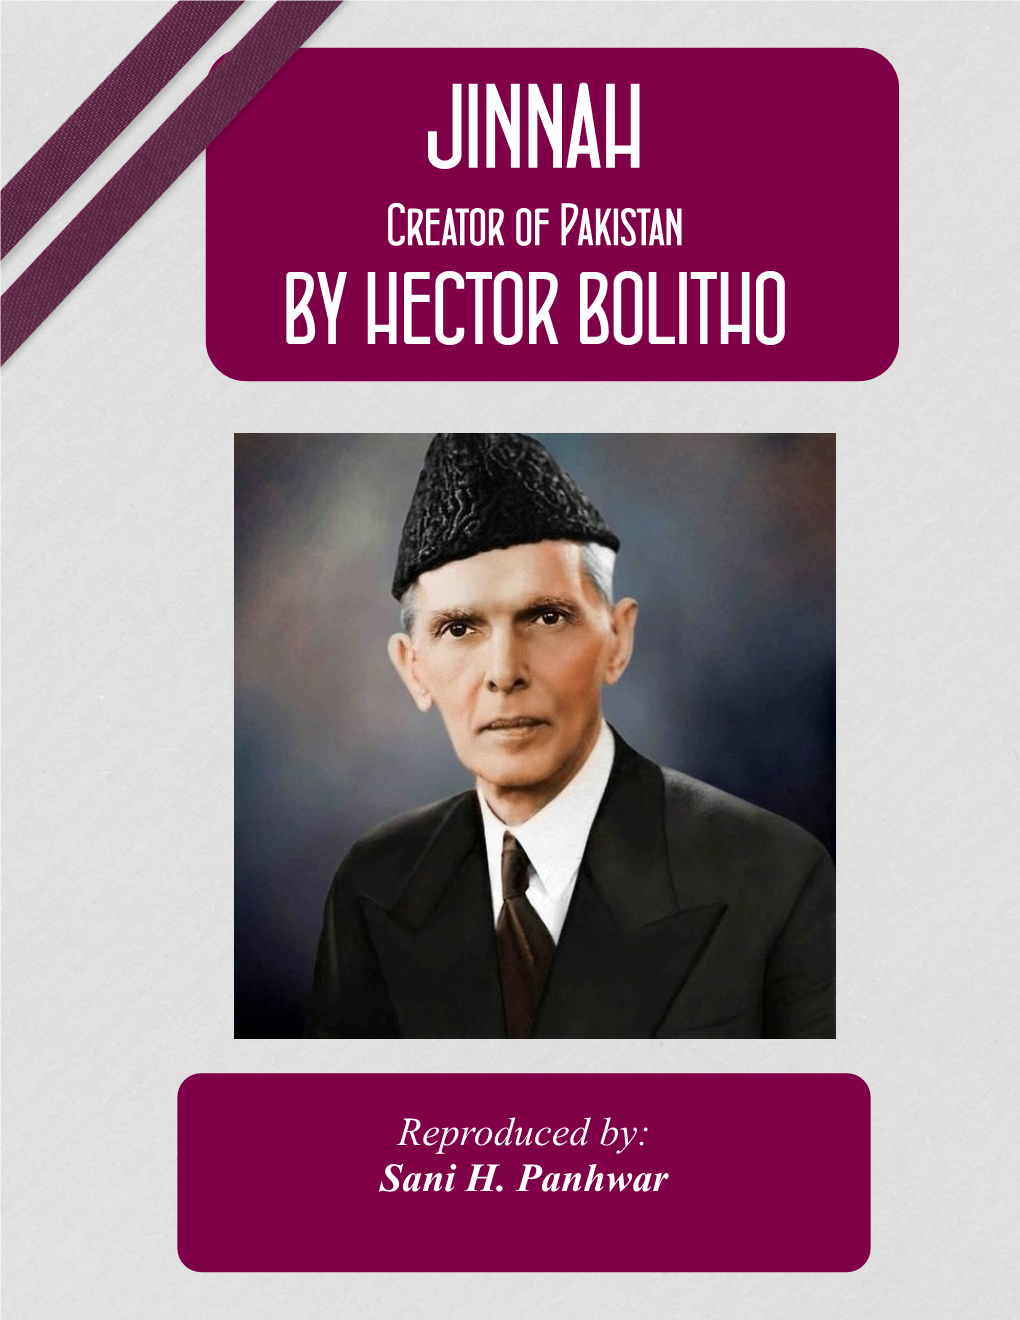 JINNAH Creator of Pakistan by HECTOR BOLITHO